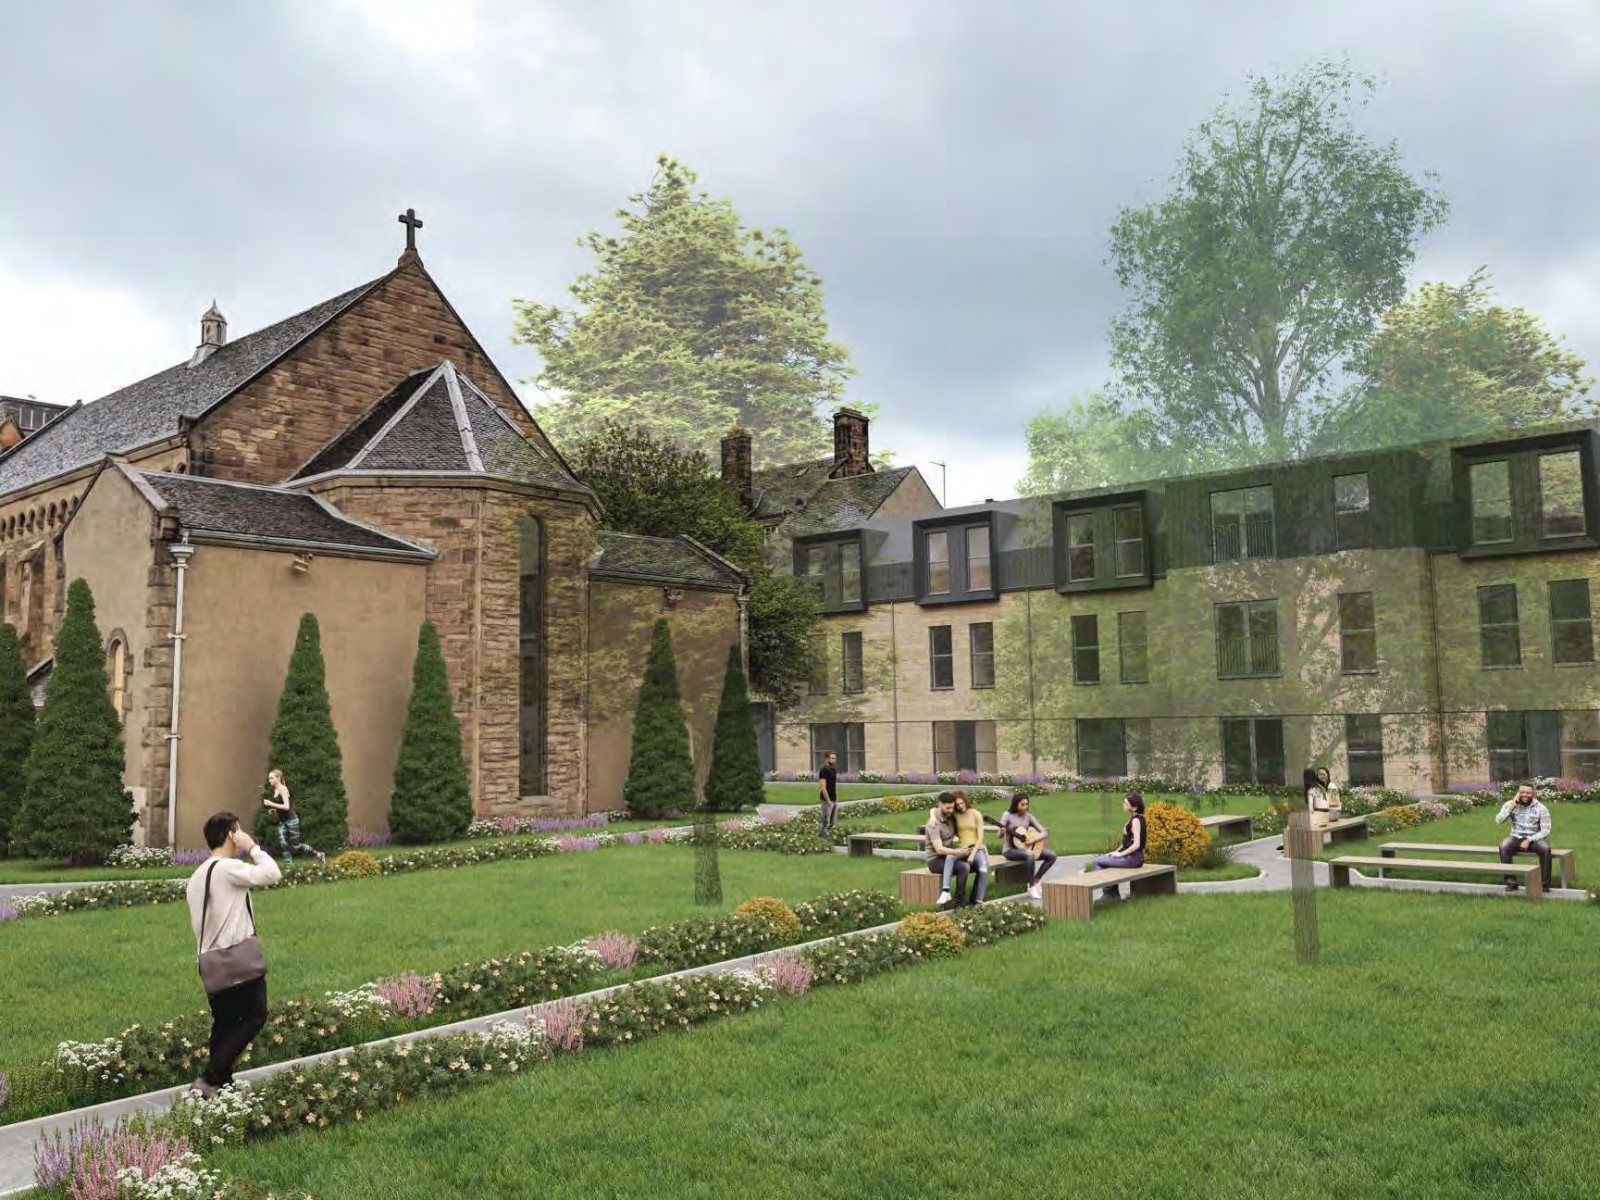 Student digs proposed at C-listed Edinburgh chapel